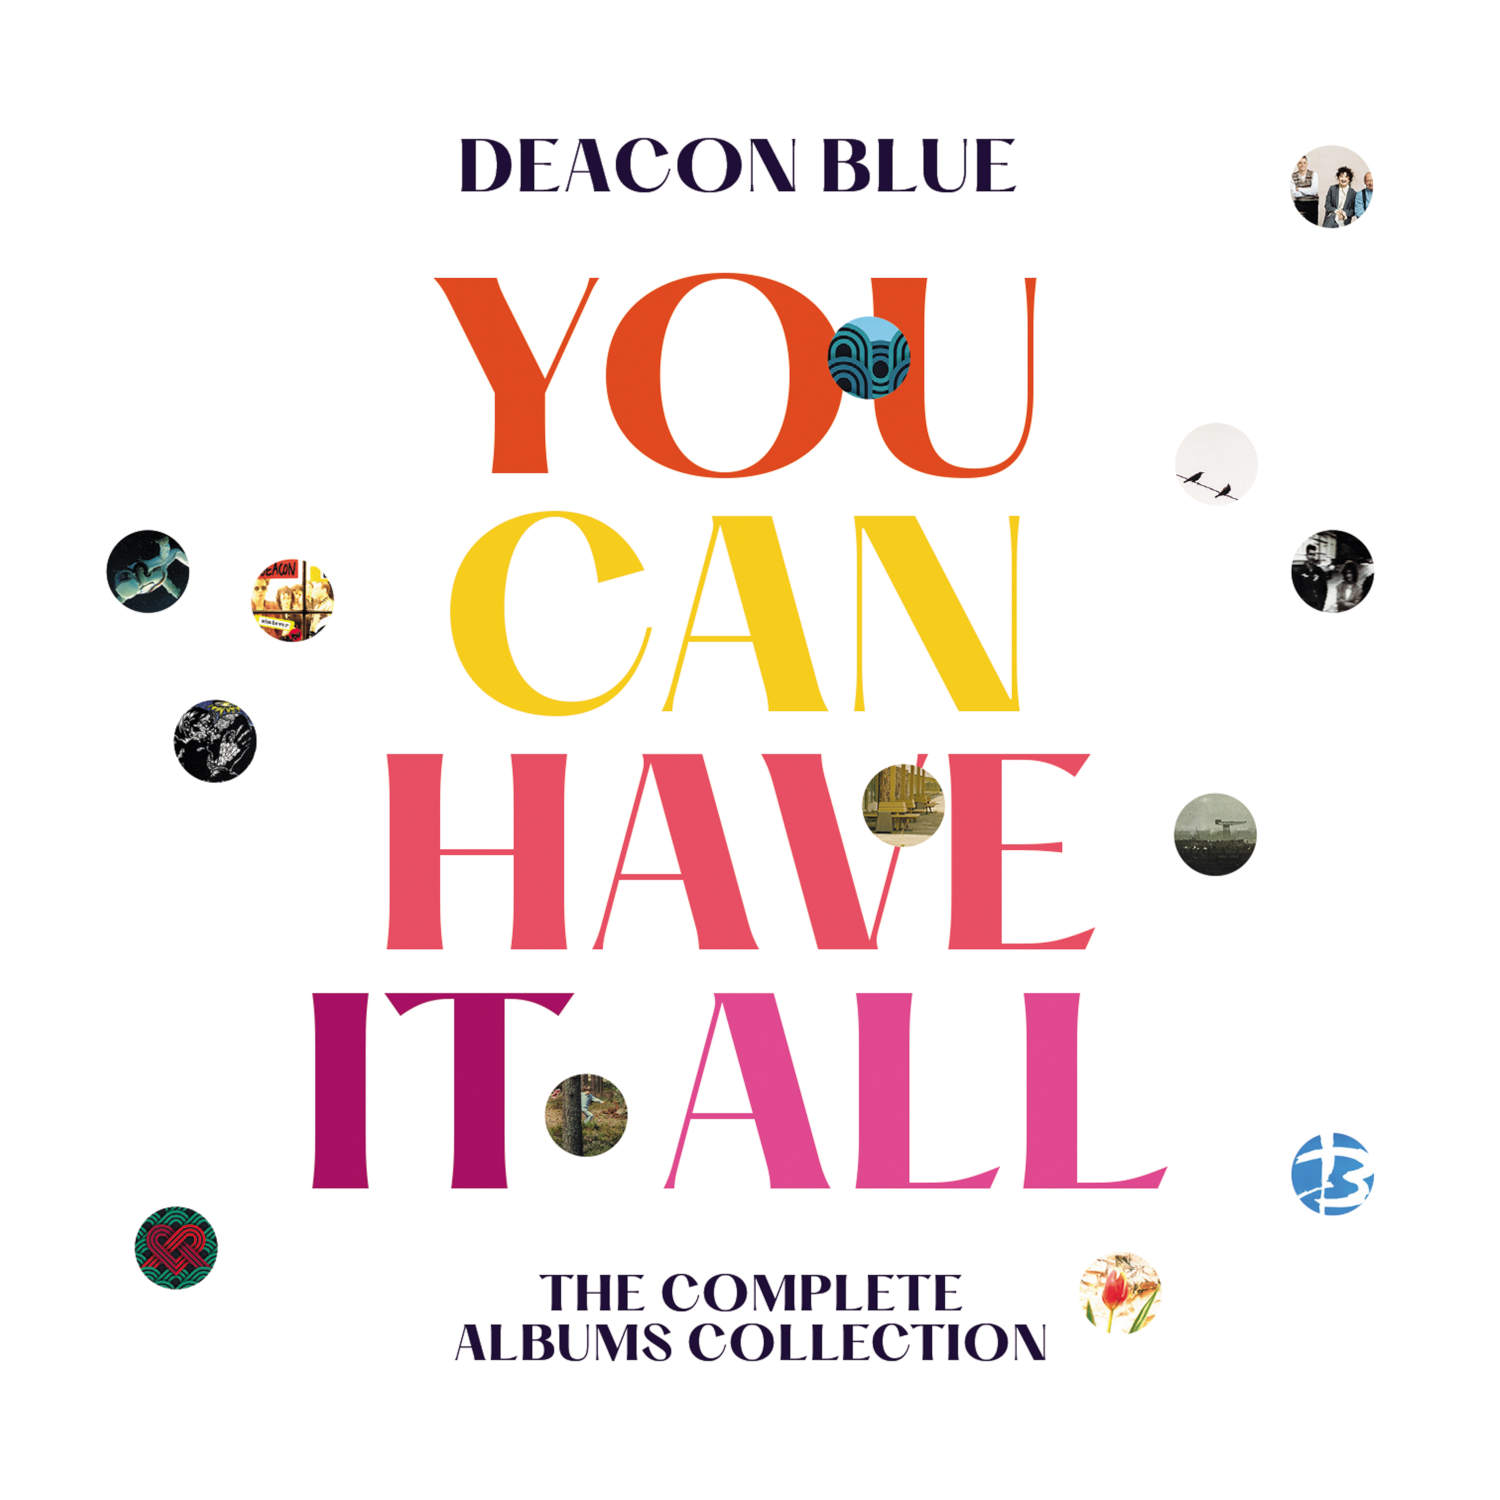 imod for meget flaske Deacon Blue / You Can Have It All: The Complete Albums Collection –  SuperDeluxeEdition